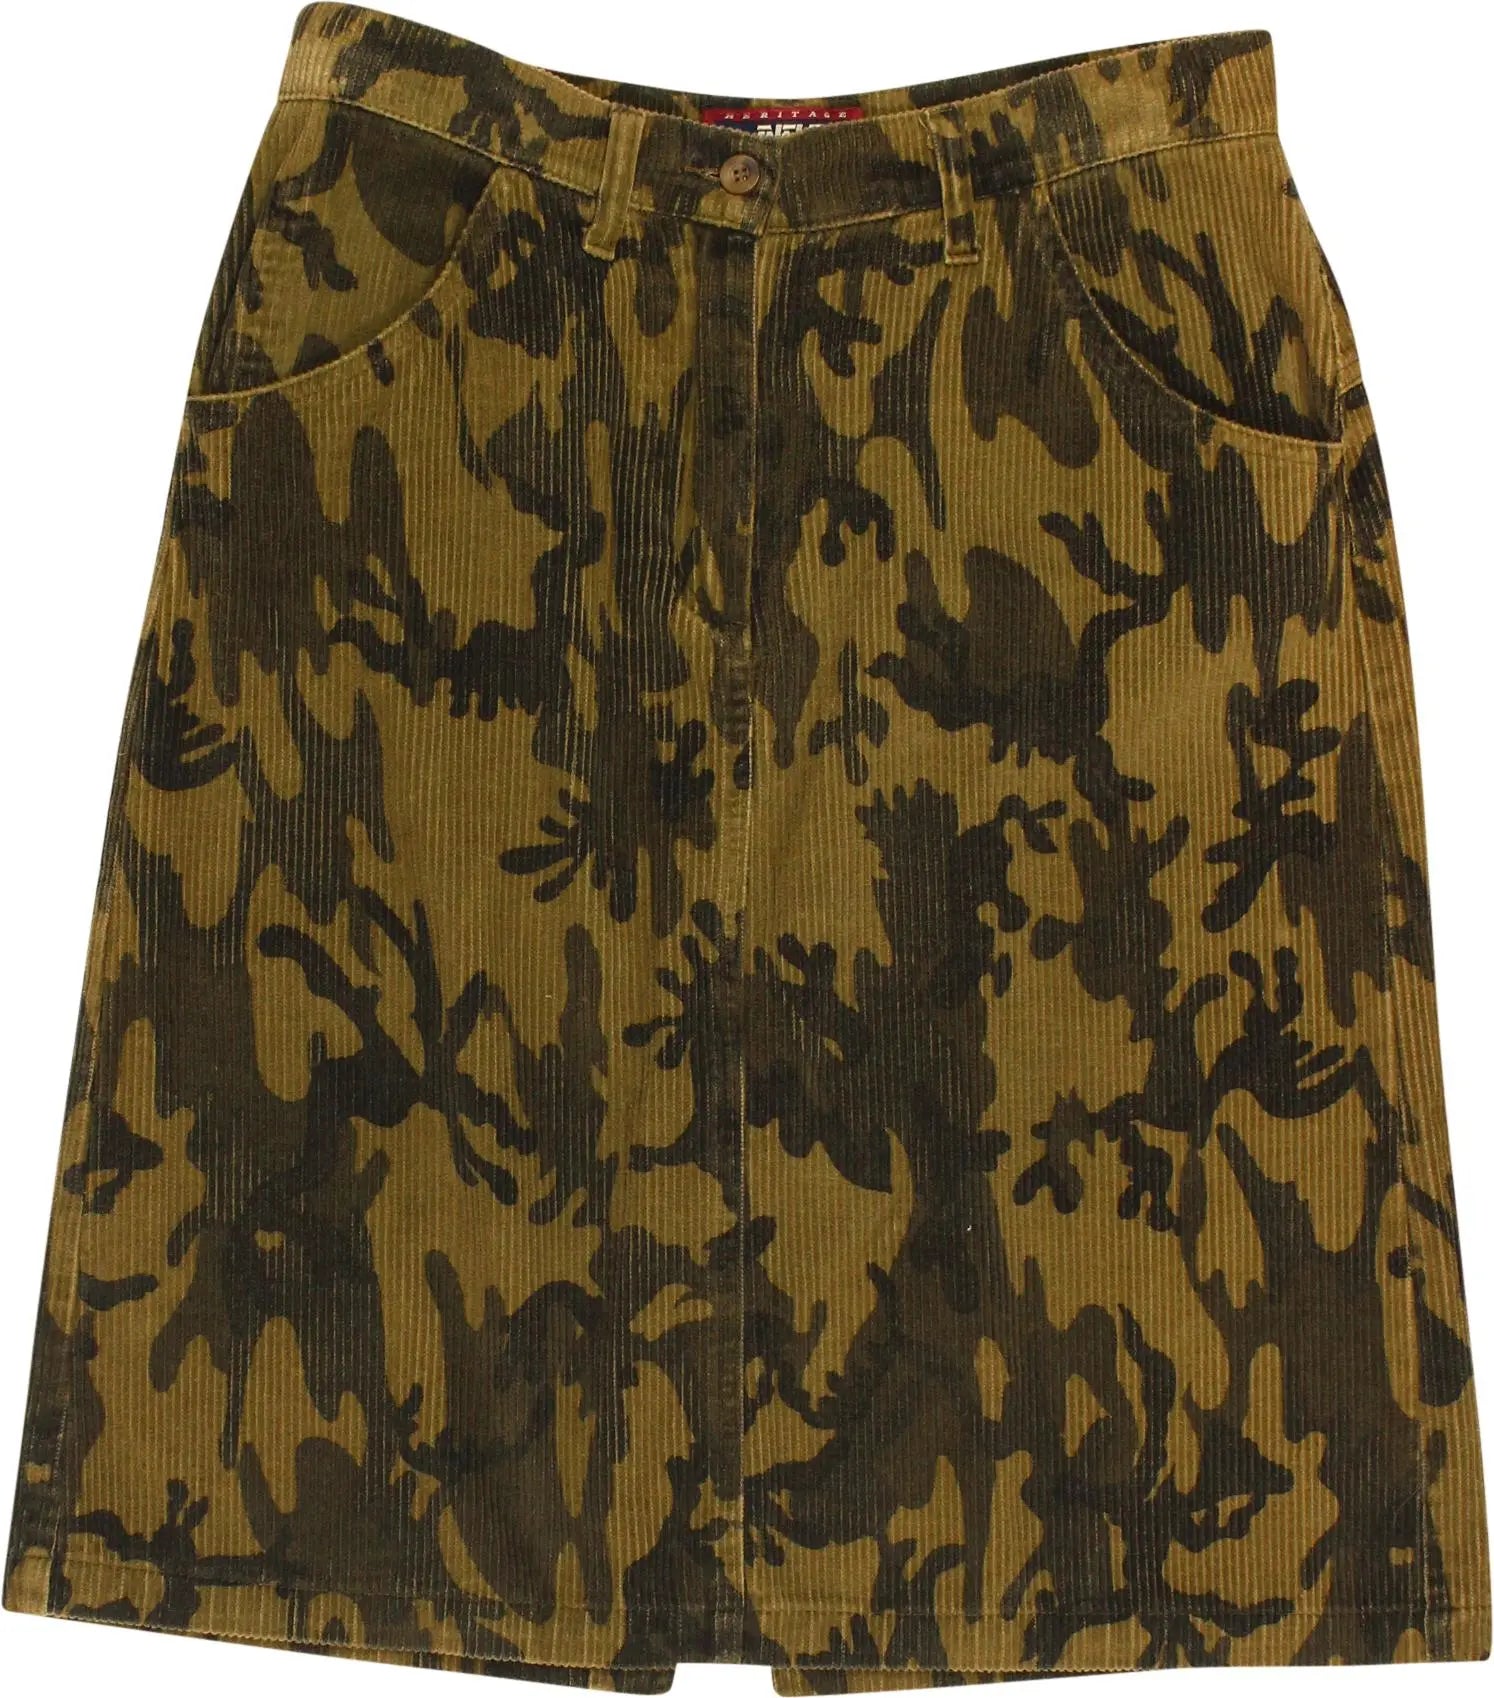 Rifle - Military Print Skirt- ThriftTale.com - Vintage and second handclothing